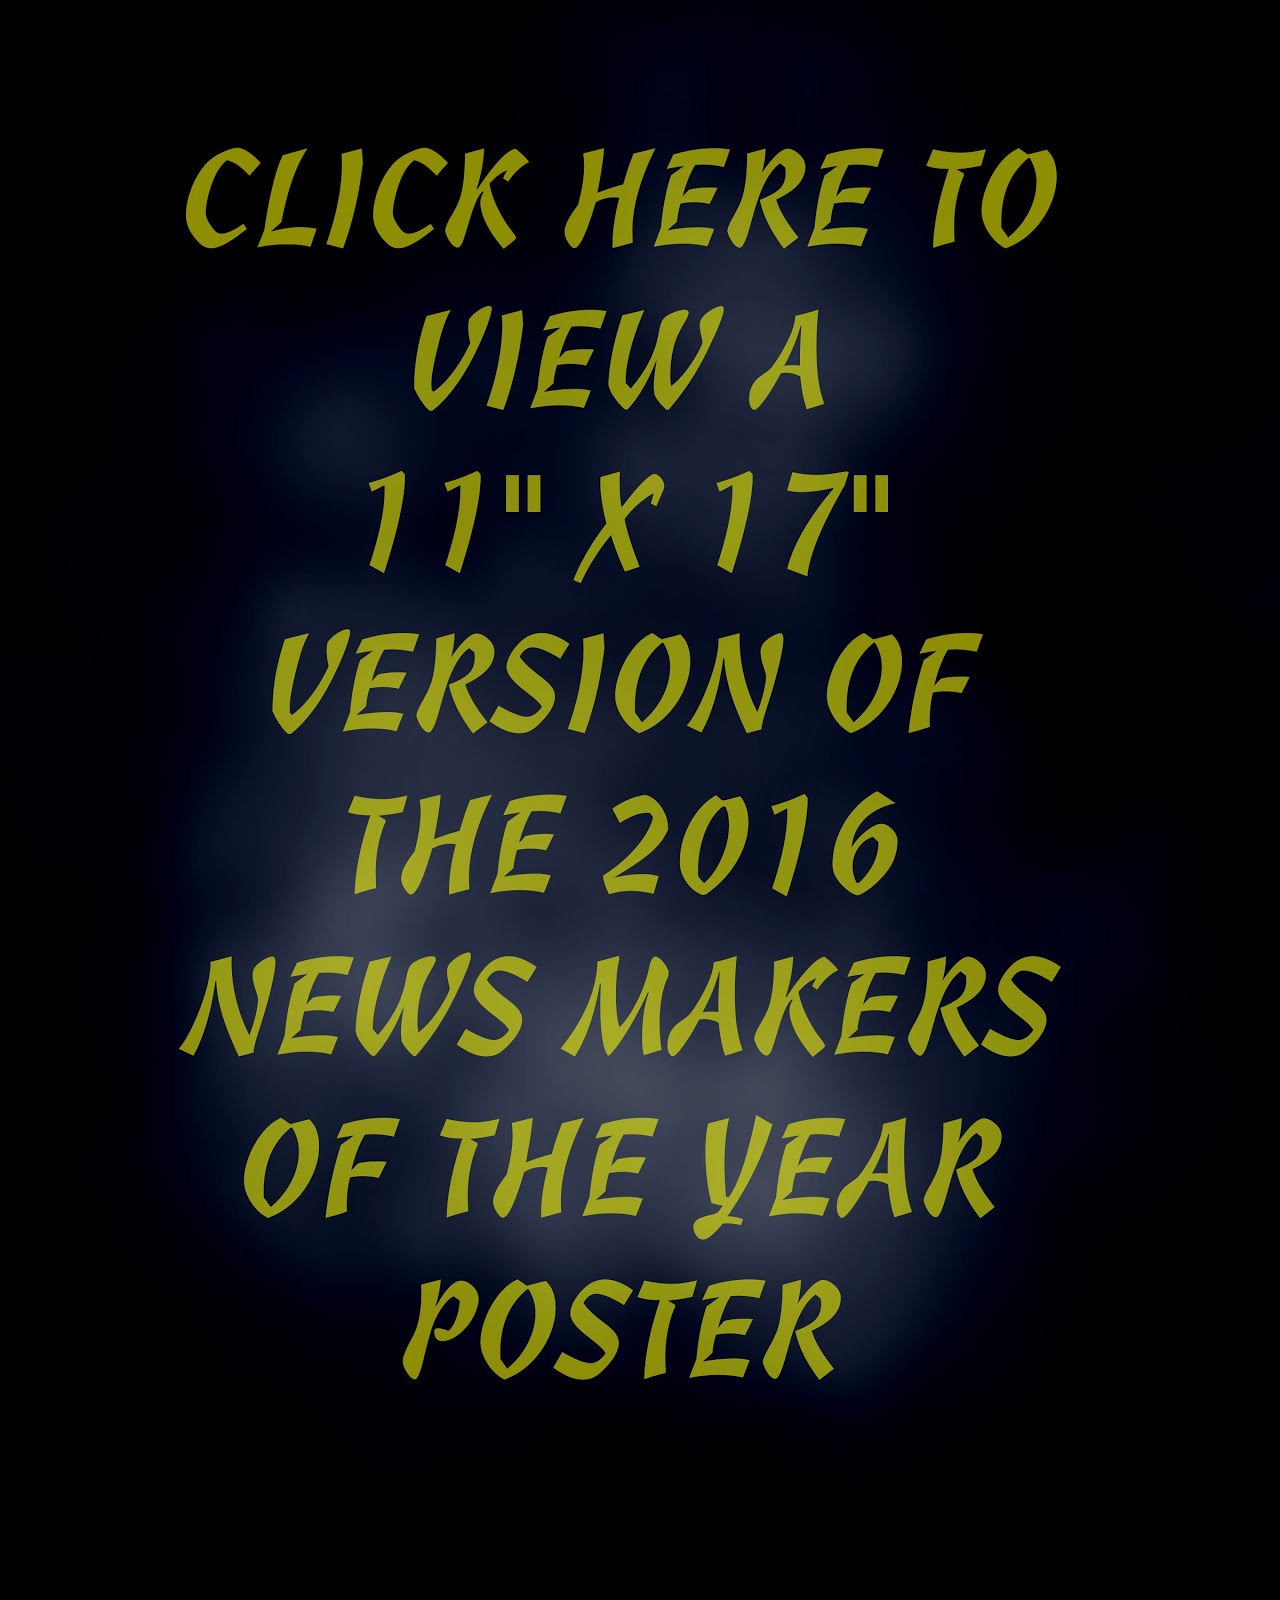 2016 NEWS MAKERS POSTER